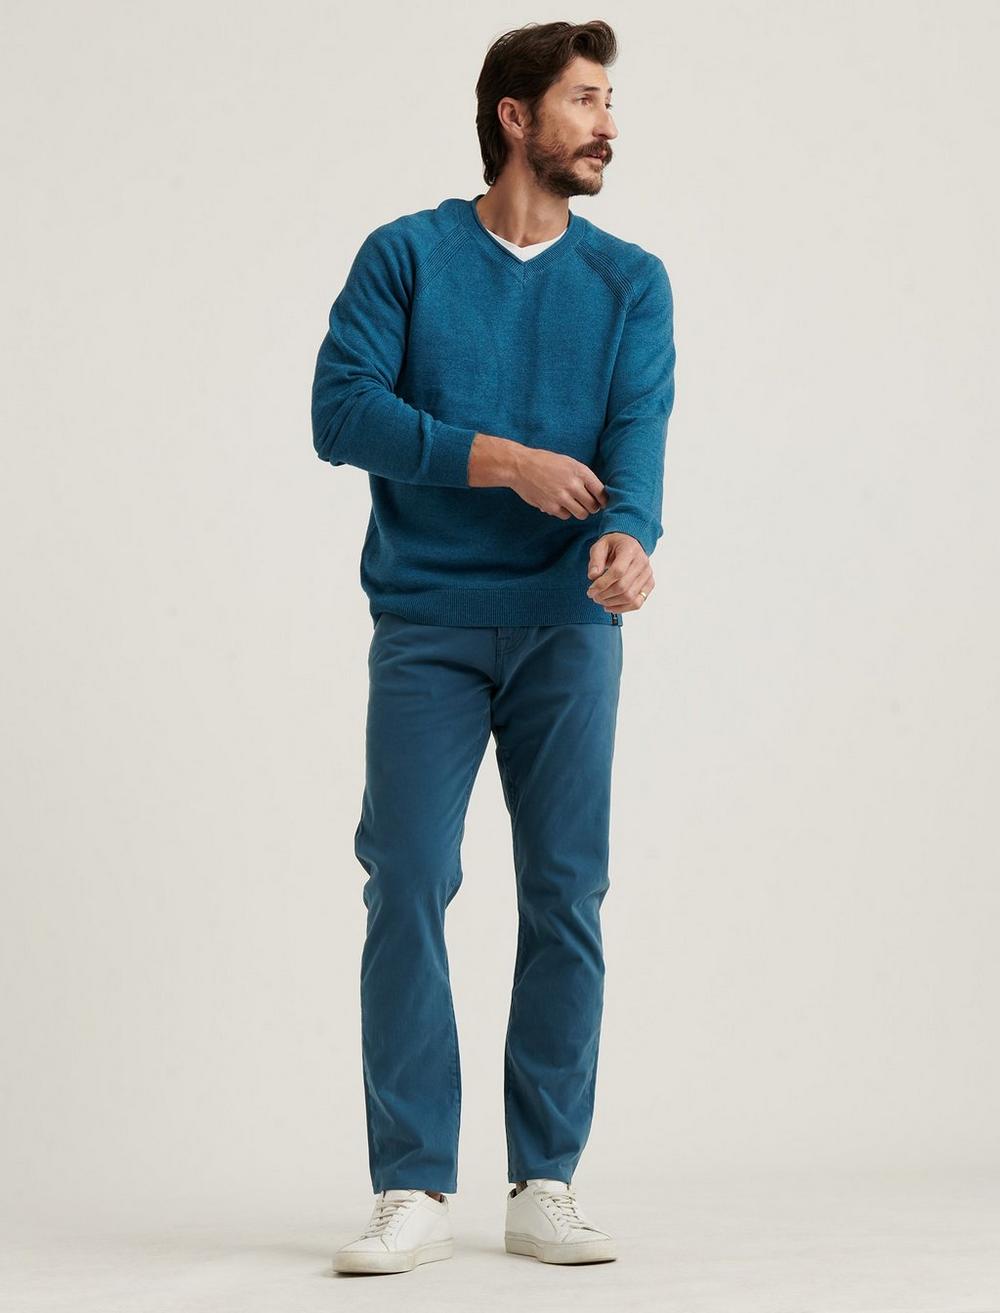 WELTER WEIGHT V-NECK SWEATER, image 2